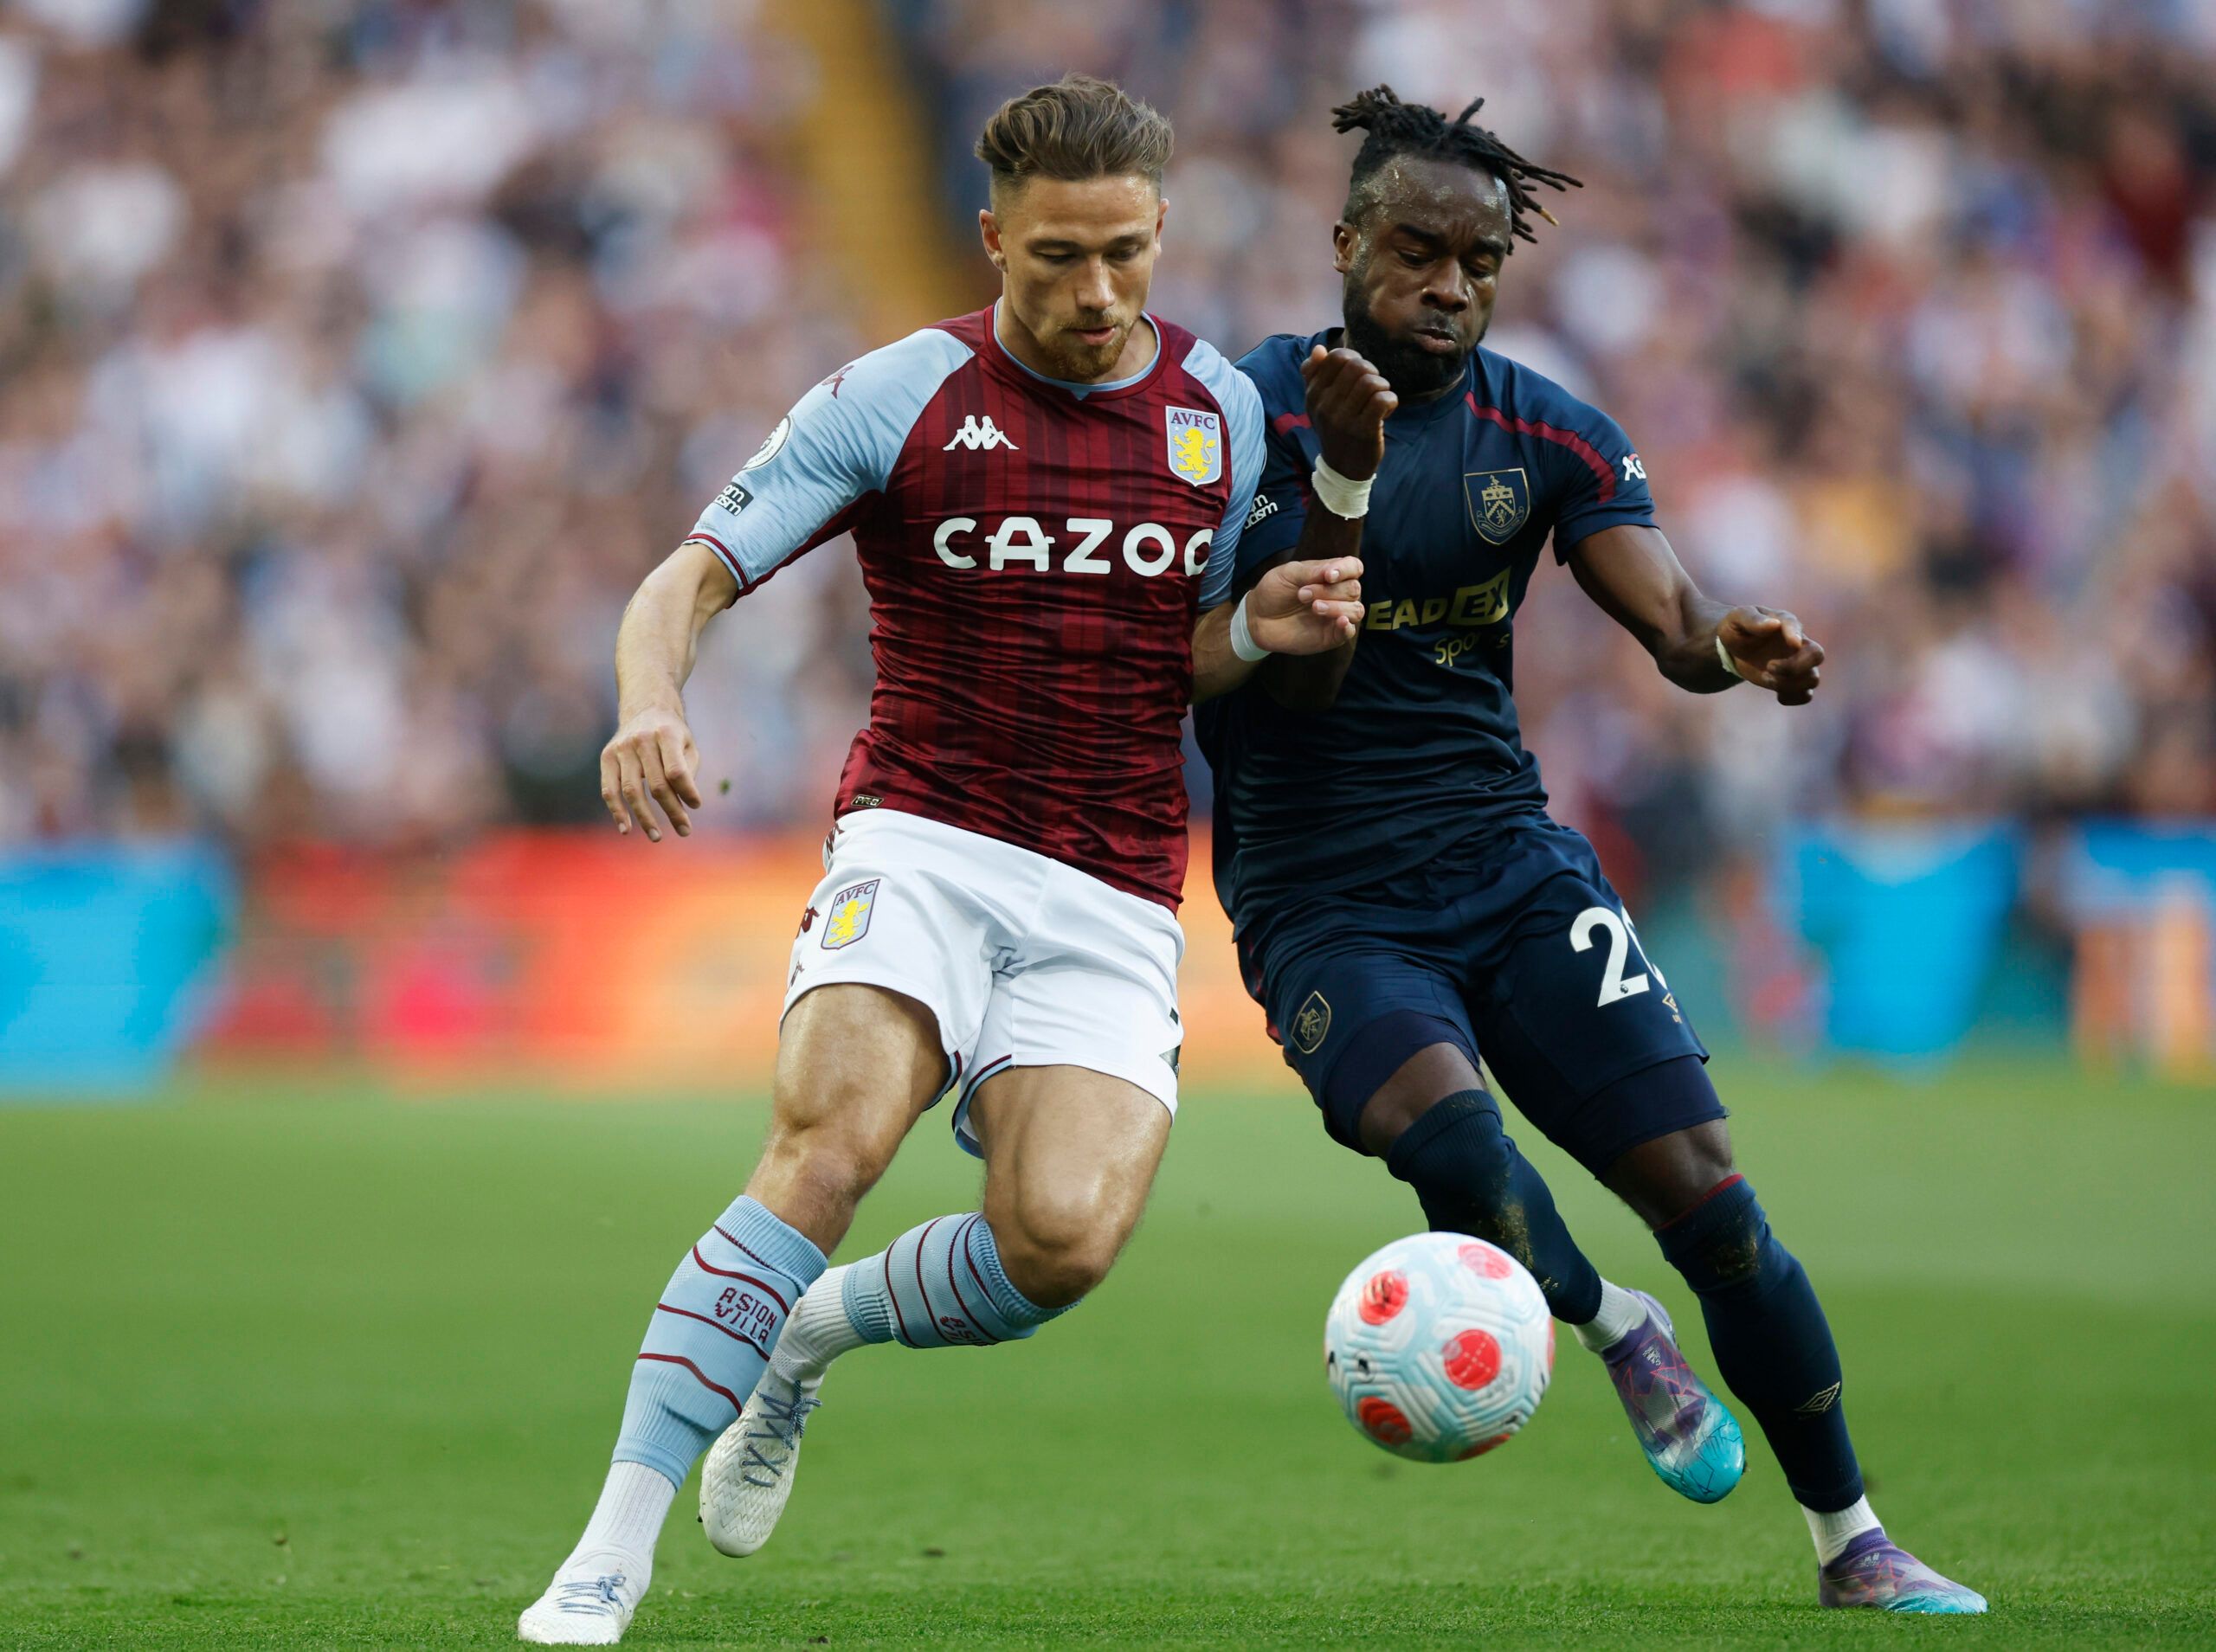 Soccer Football - Premier League - Aston Villa v Burnley - Villa Park, Birmingham, Britain - May 19, 2022 Aston Villa's Matty Cash in action with Burnley's Maxwel Cornet Action Images via Reuters/Peter Cziborra EDITORIAL USE ONLY. No use with unauthorized audio, video, data, fixture lists, club/league logos or 'live' services. Online in-match use limited to 75 images, no video emulation. No use in betting, games or single club /league/player publications.  Please contact your account representat